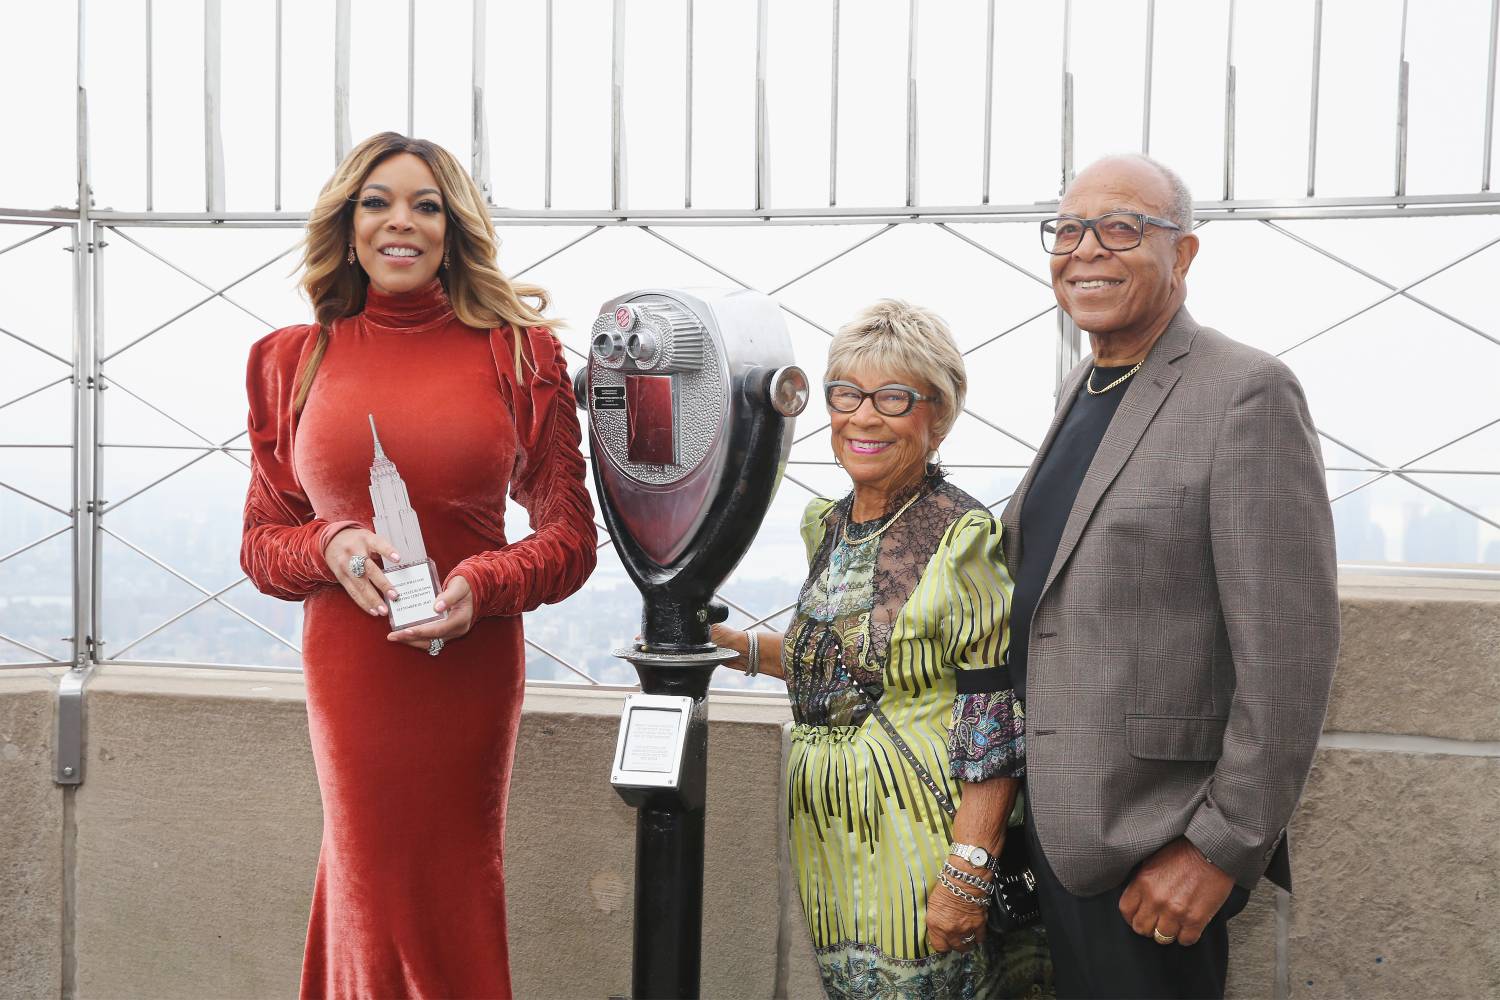 Television host, actress, author, fashion designer, and former radio personality, Wendy Williams, Shirley Williams and Thomas Williams Sr. visit The Empire State Building on September 18, 2017 in New York City.